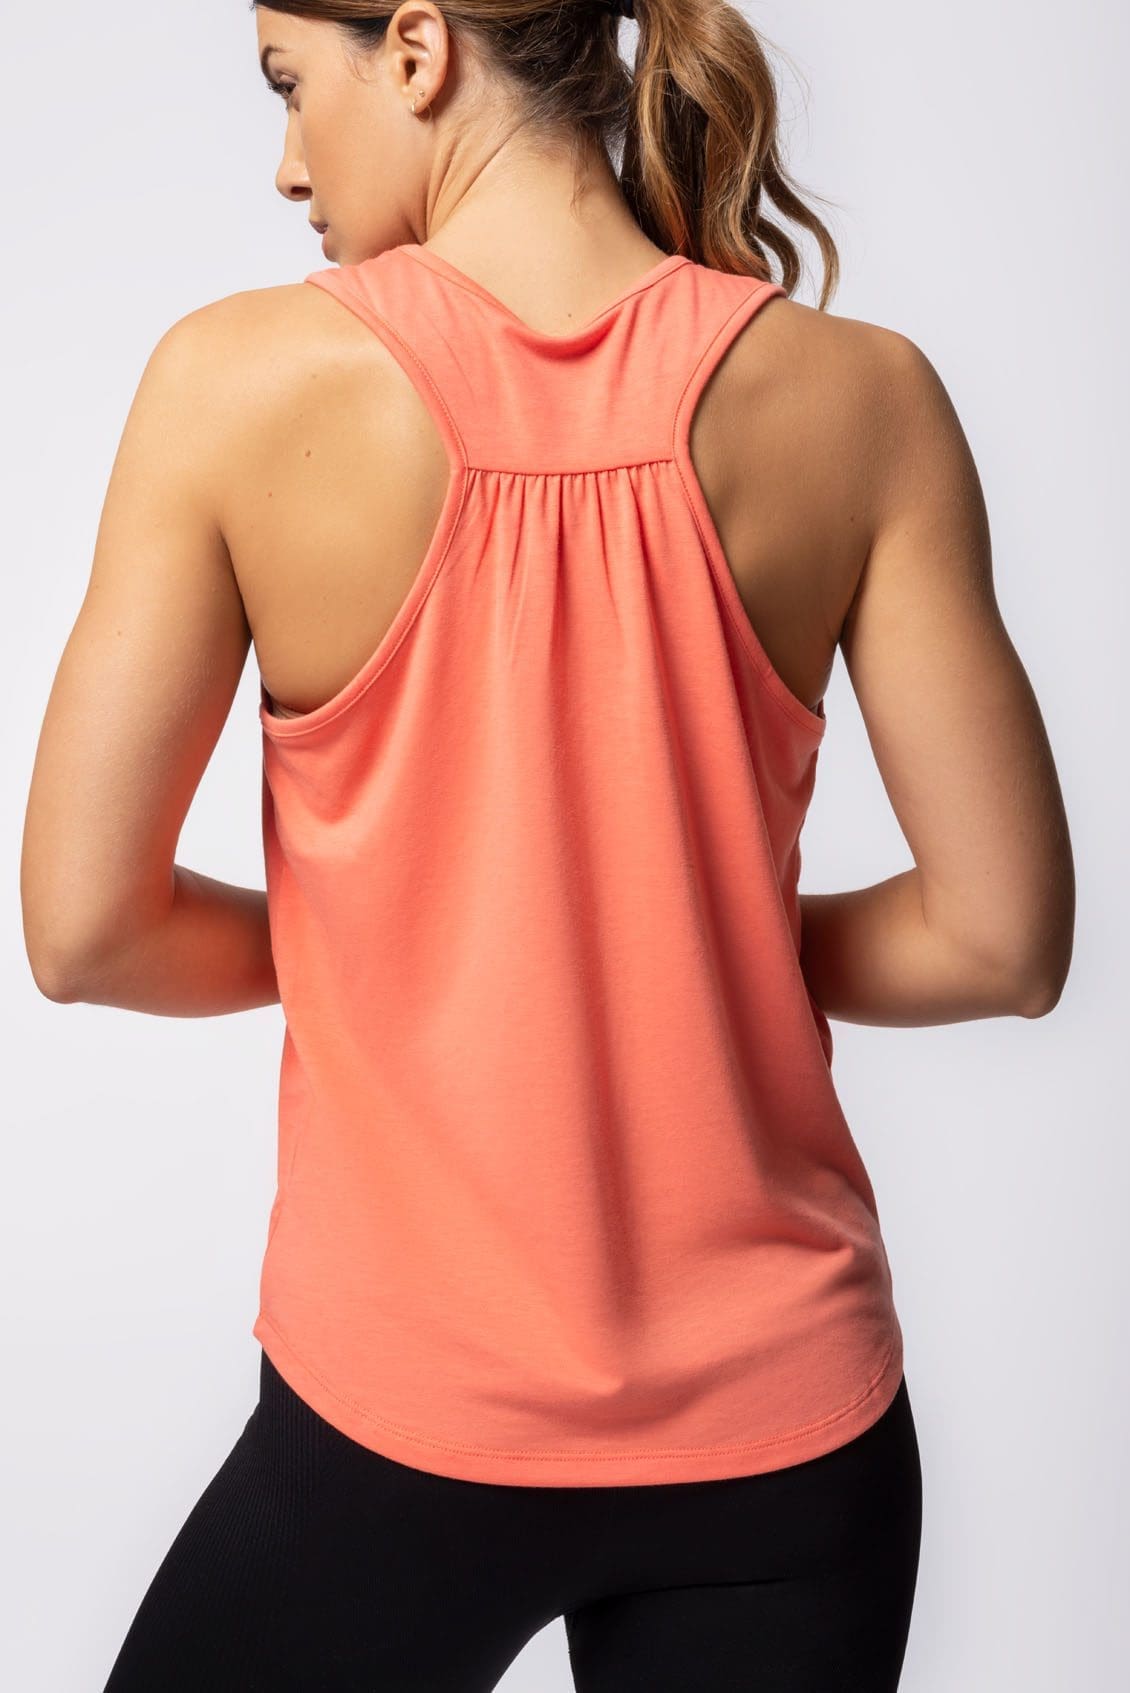 20 Tank Tops With Built-In Bras For People Who Love Efficiency